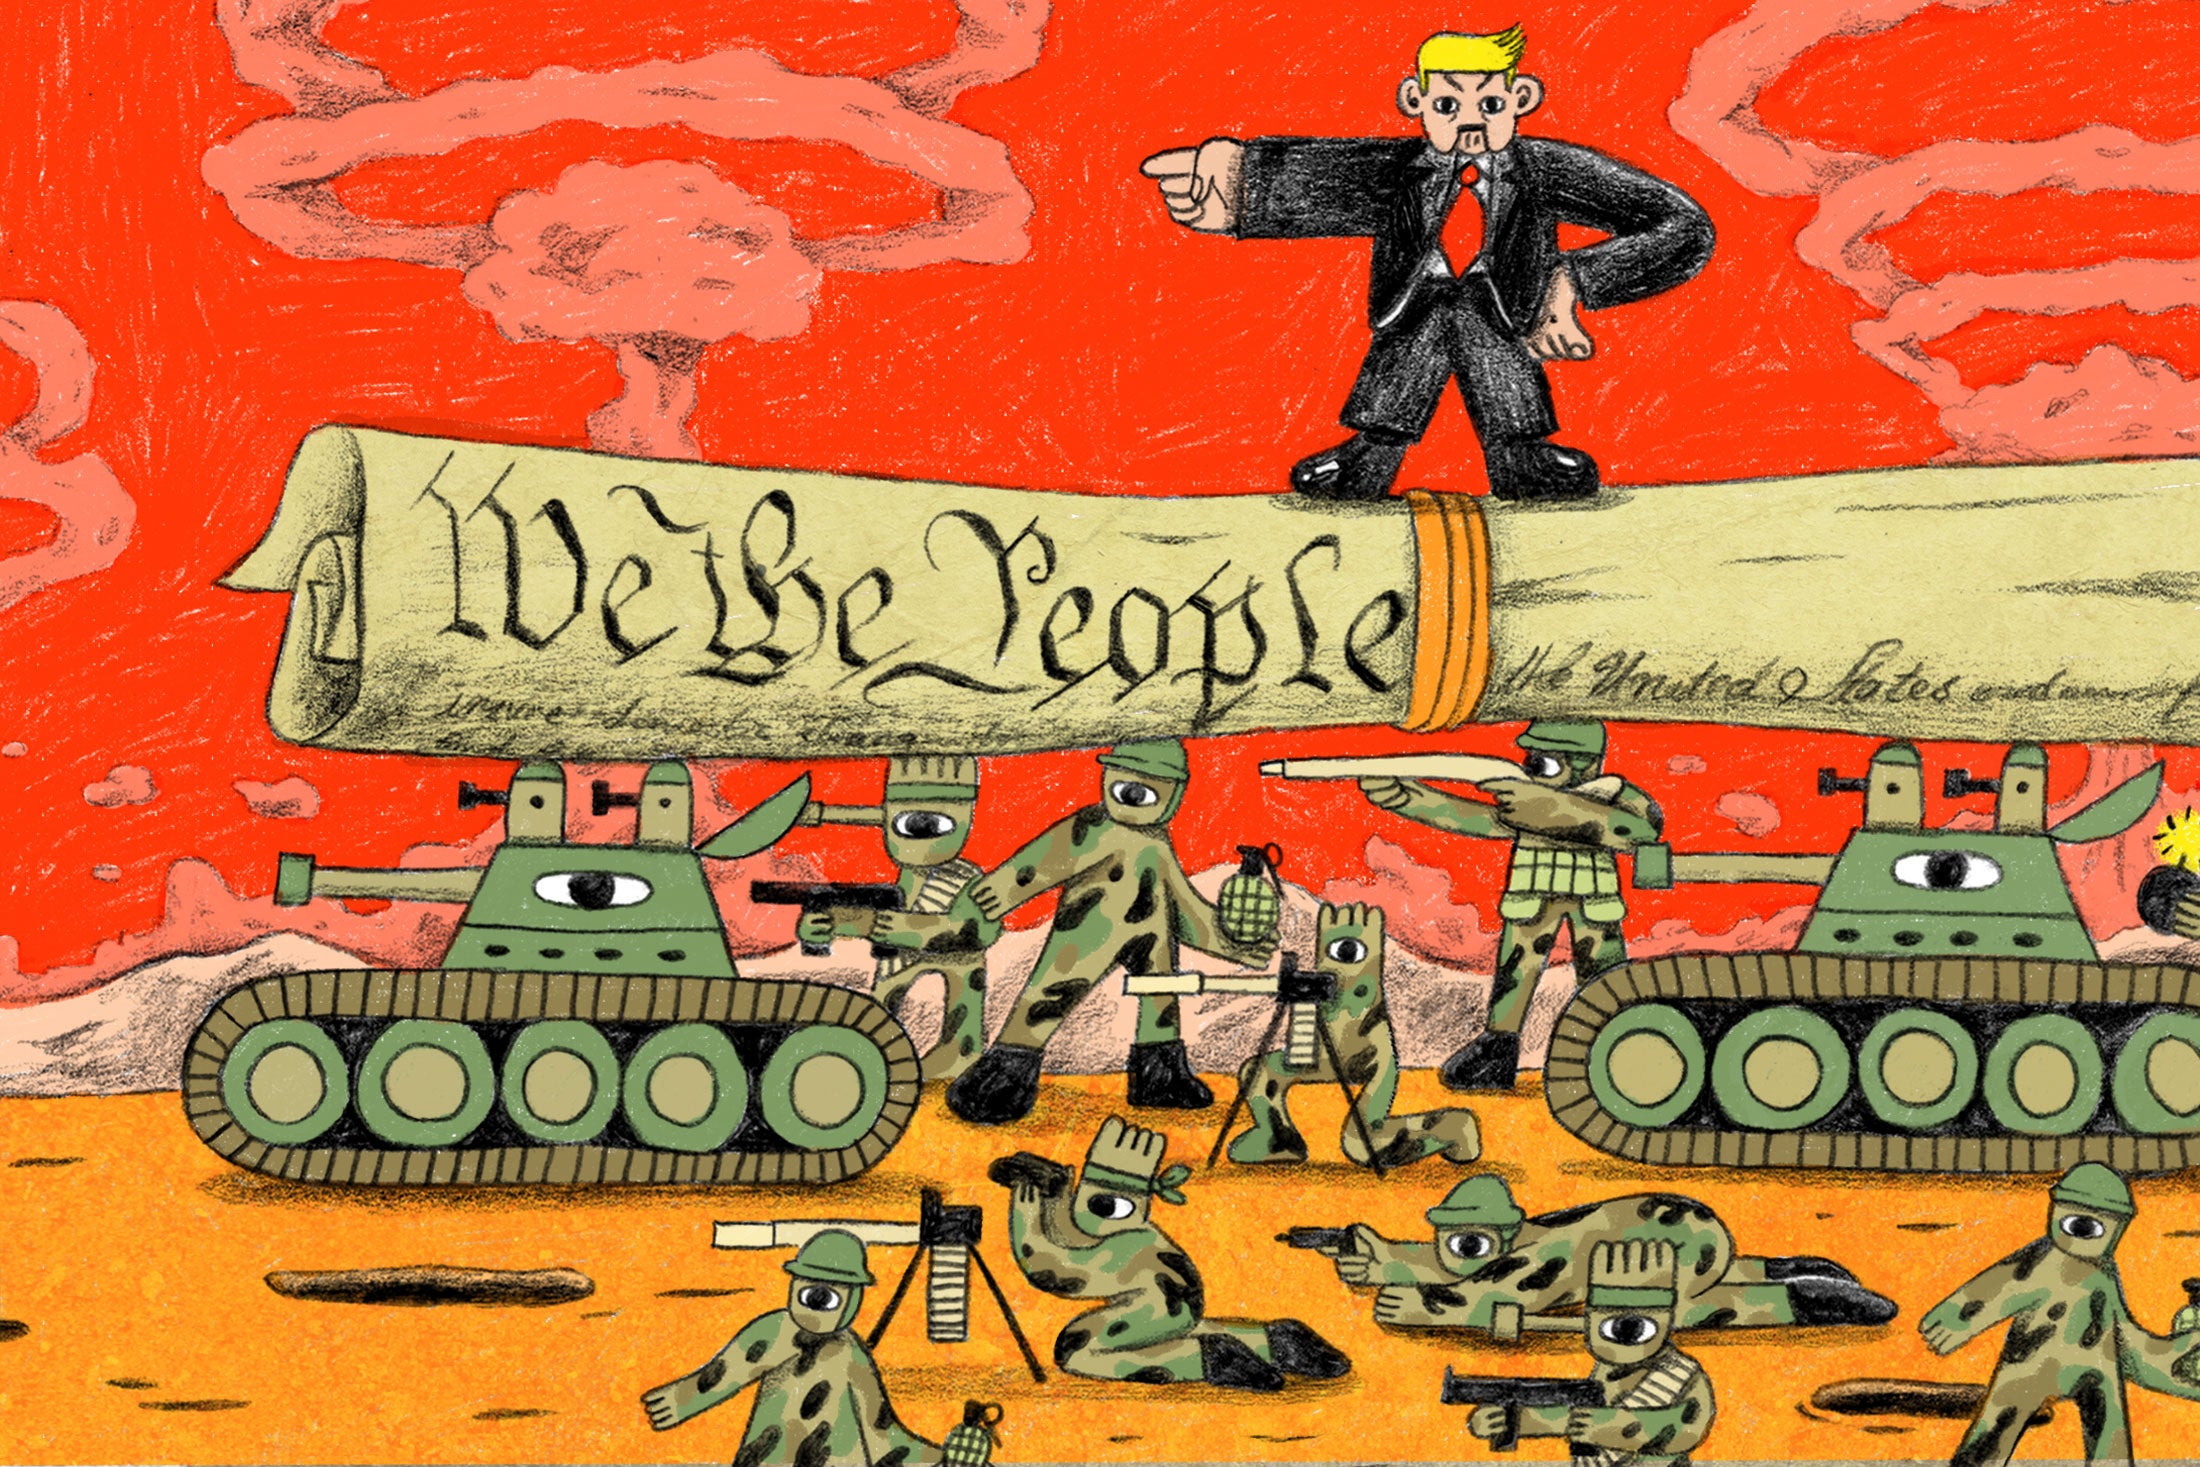 Illustration: A Donald Trump-like figure stands on a large copy of the Constitution laid across two tanks as other soldiers prepare.